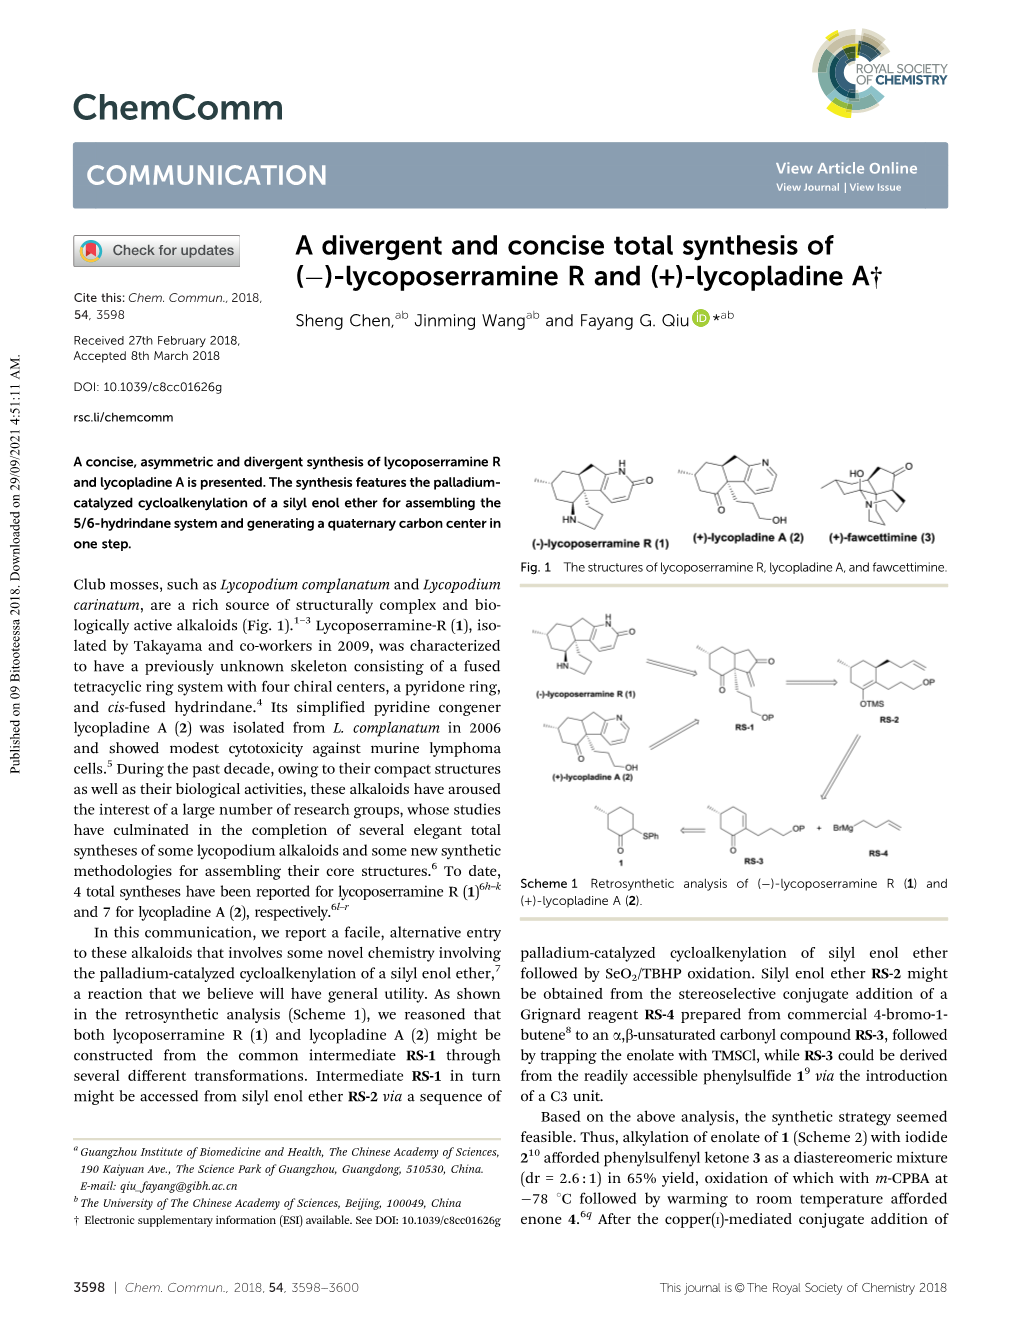 A Divergent and Concise Total Synthesis of (À)-Lycoposerramine R and (+)-Lycopladine A† Cite This: Chem